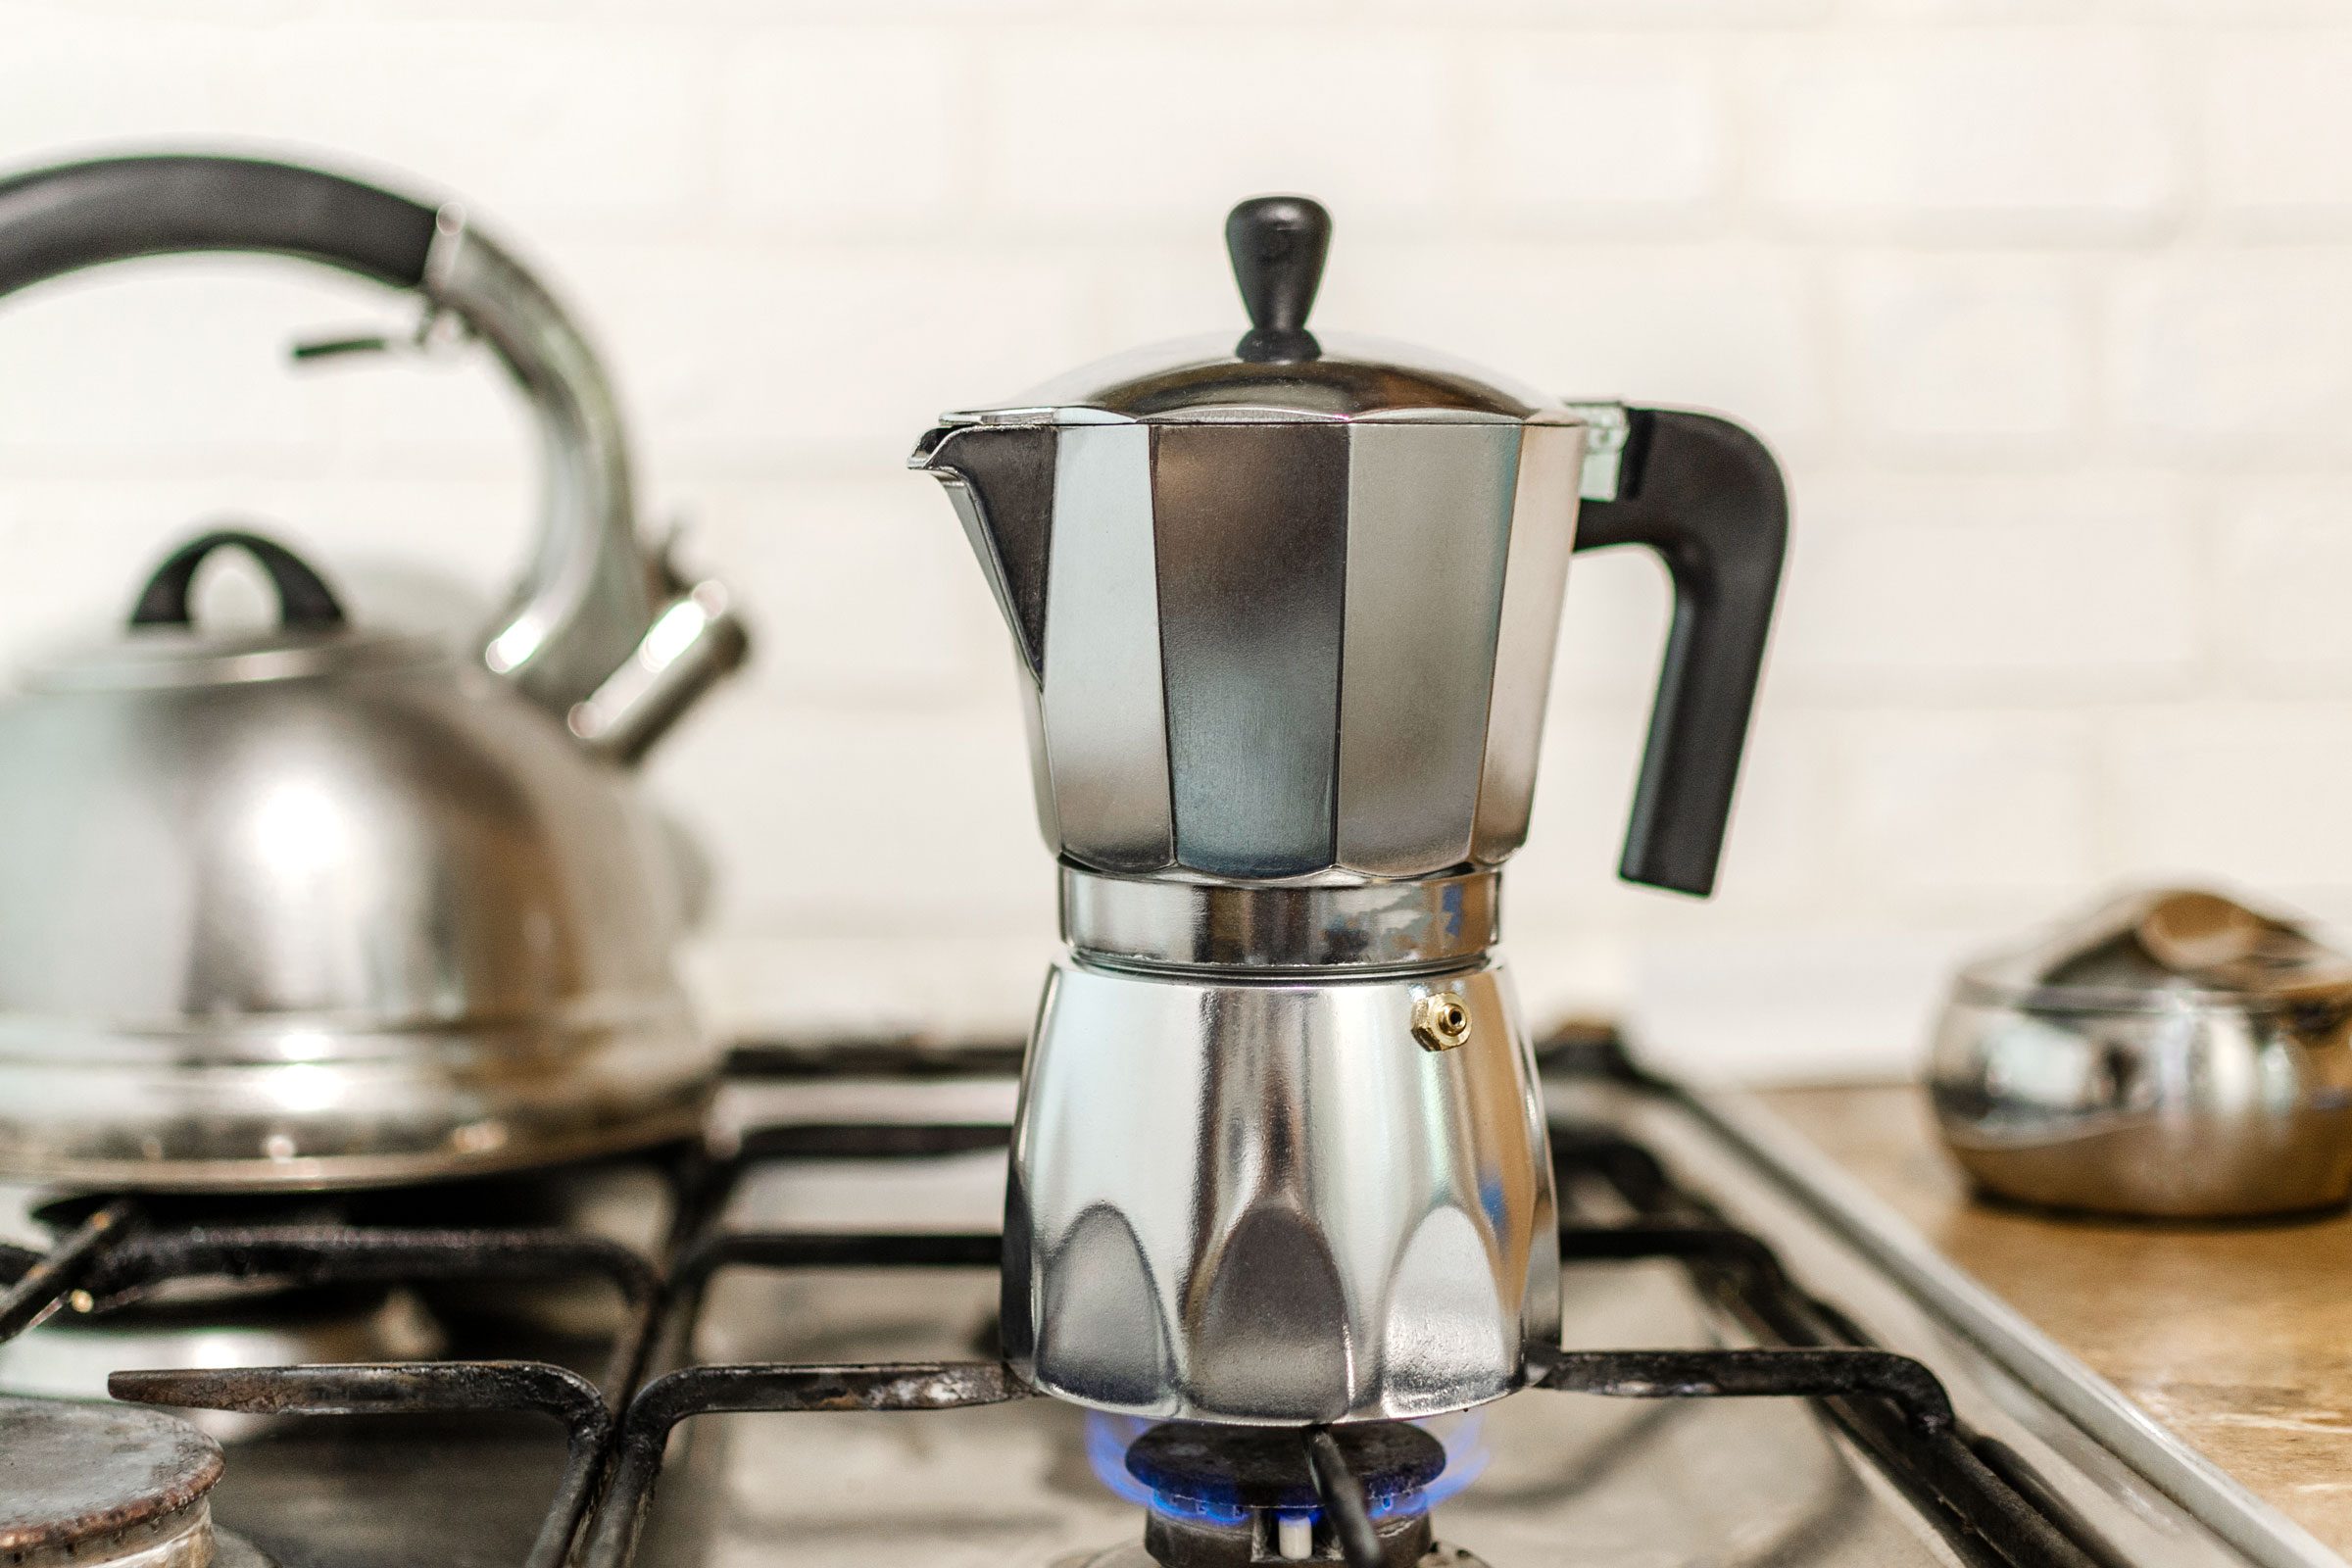 How to Use a Percolator: Step-by-Step Instructions